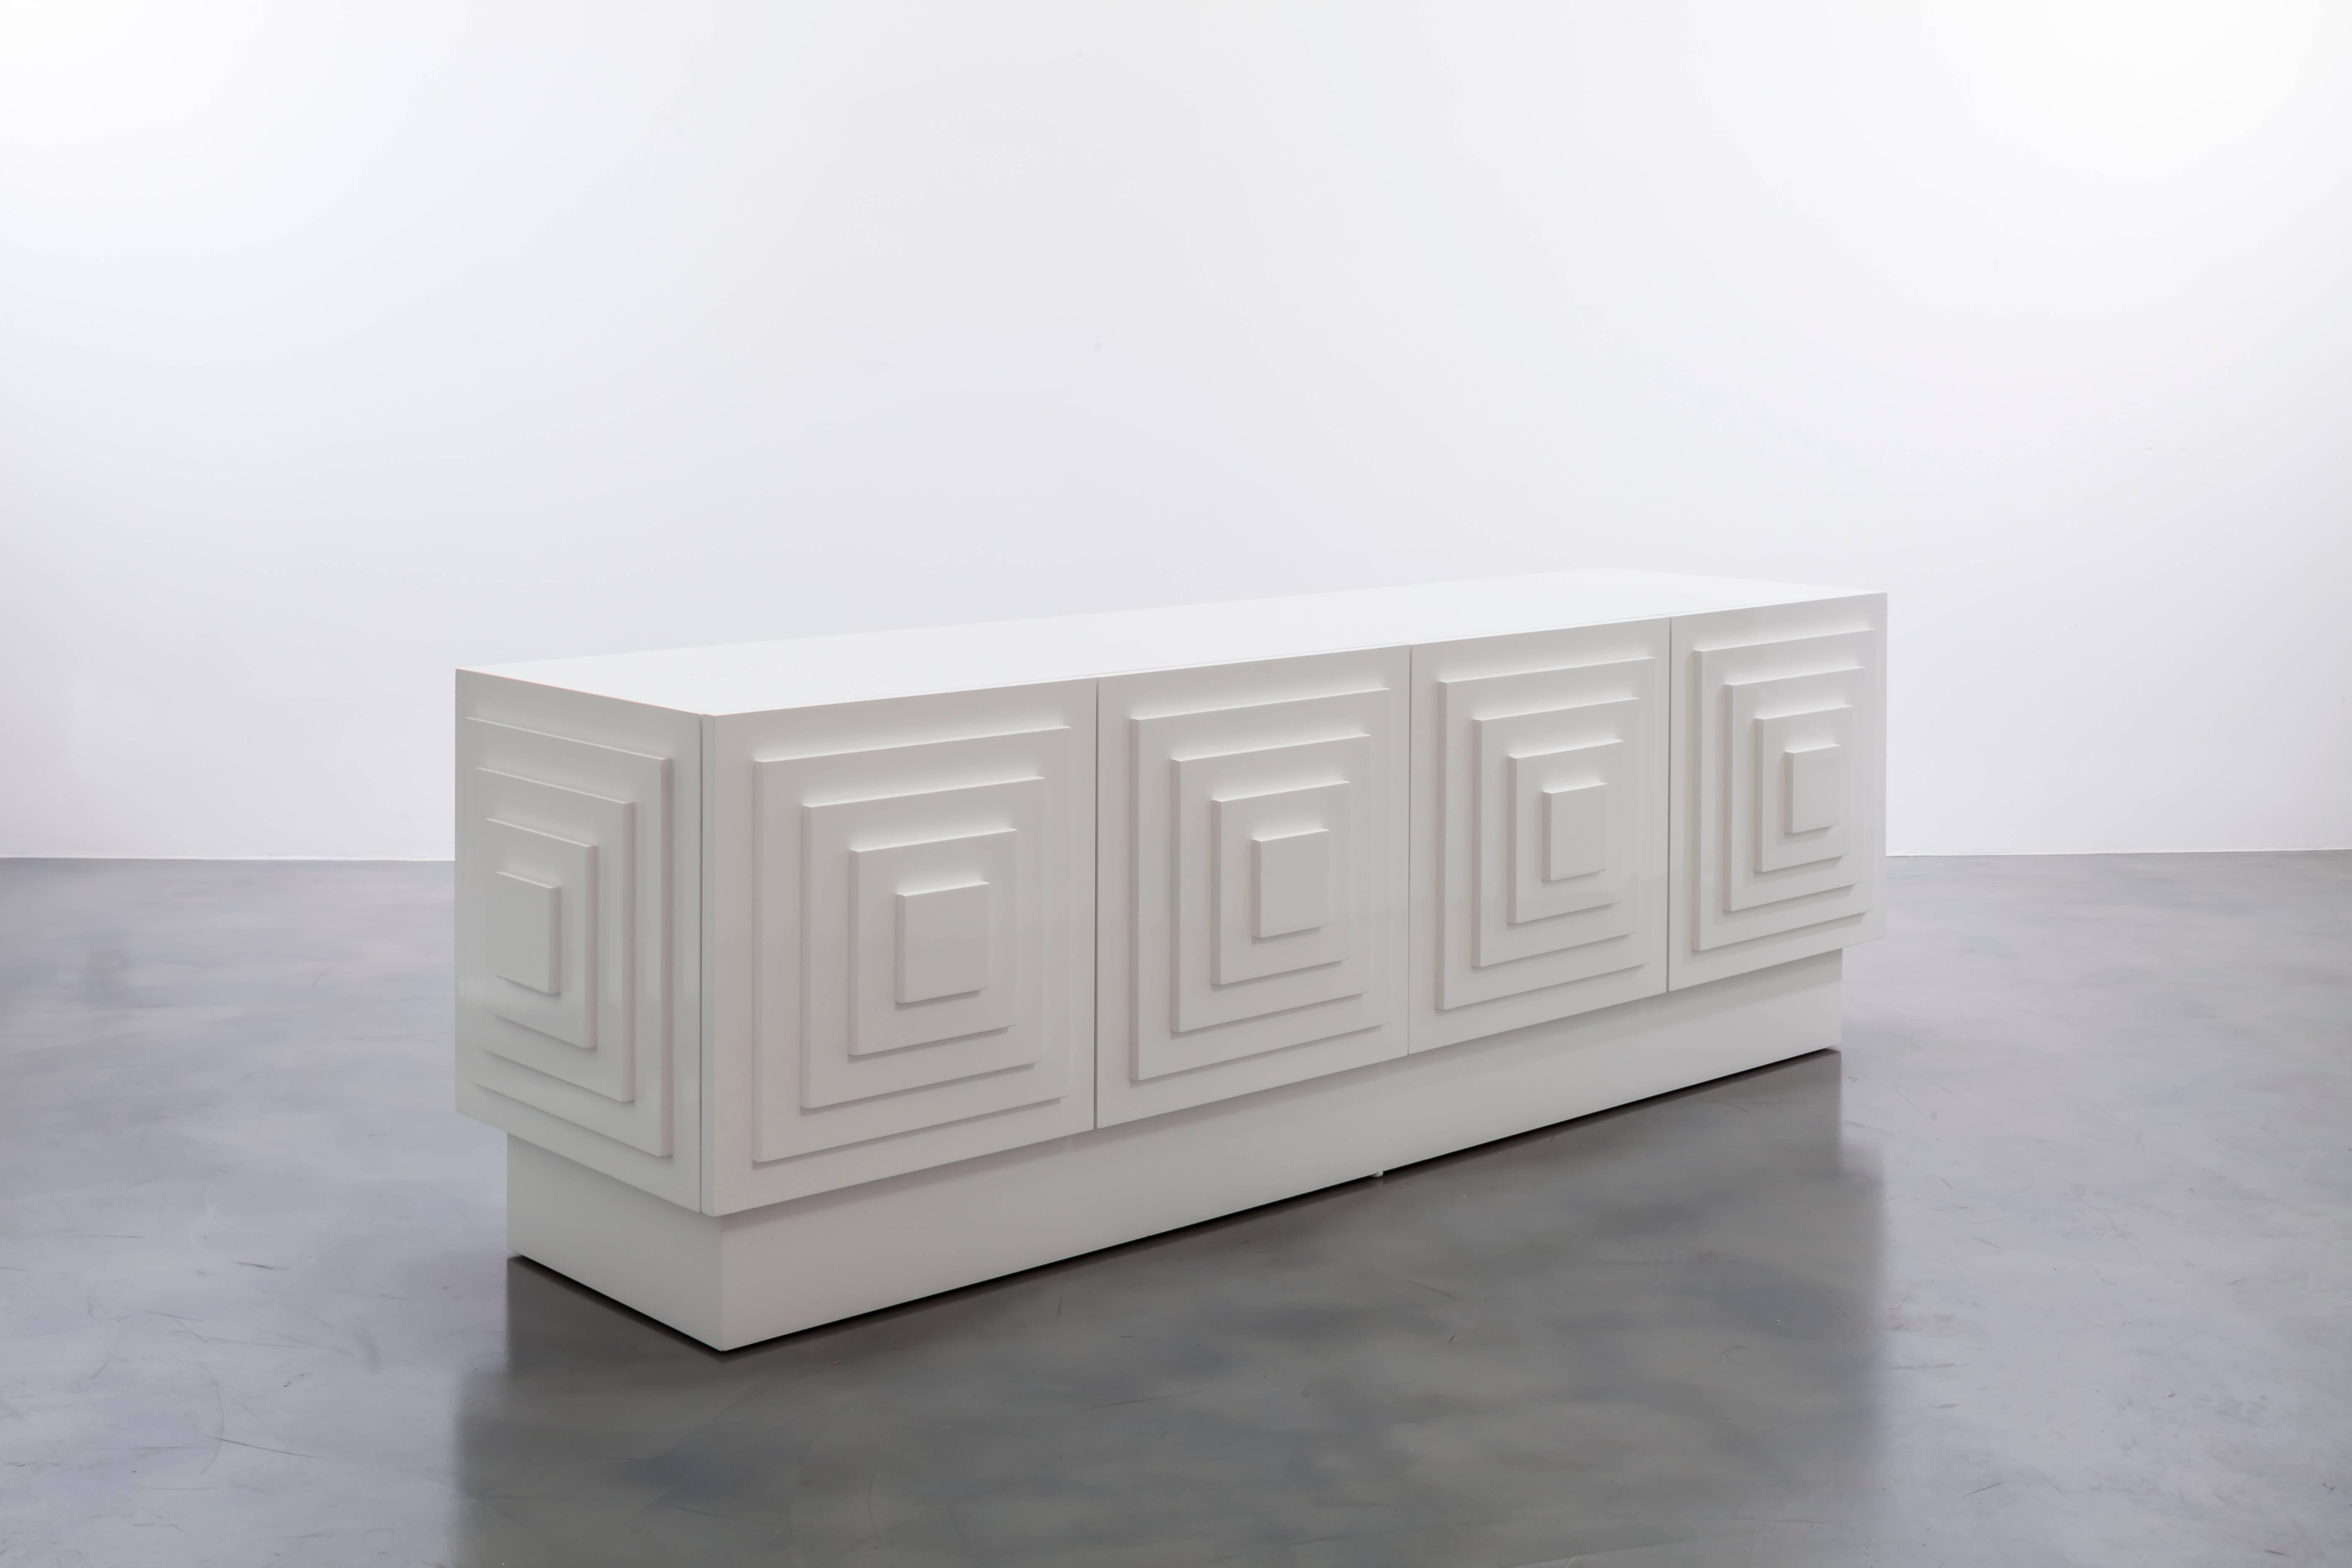 GAULTIER MEDIA CREDENZA - Modern Lacquer Cabinet with Concentric Square Design

The Gaultier Media Credenza is a beautifully crafted piece of furniture that combines style and functionality. The credenza features a sleek lacquered finish that gives